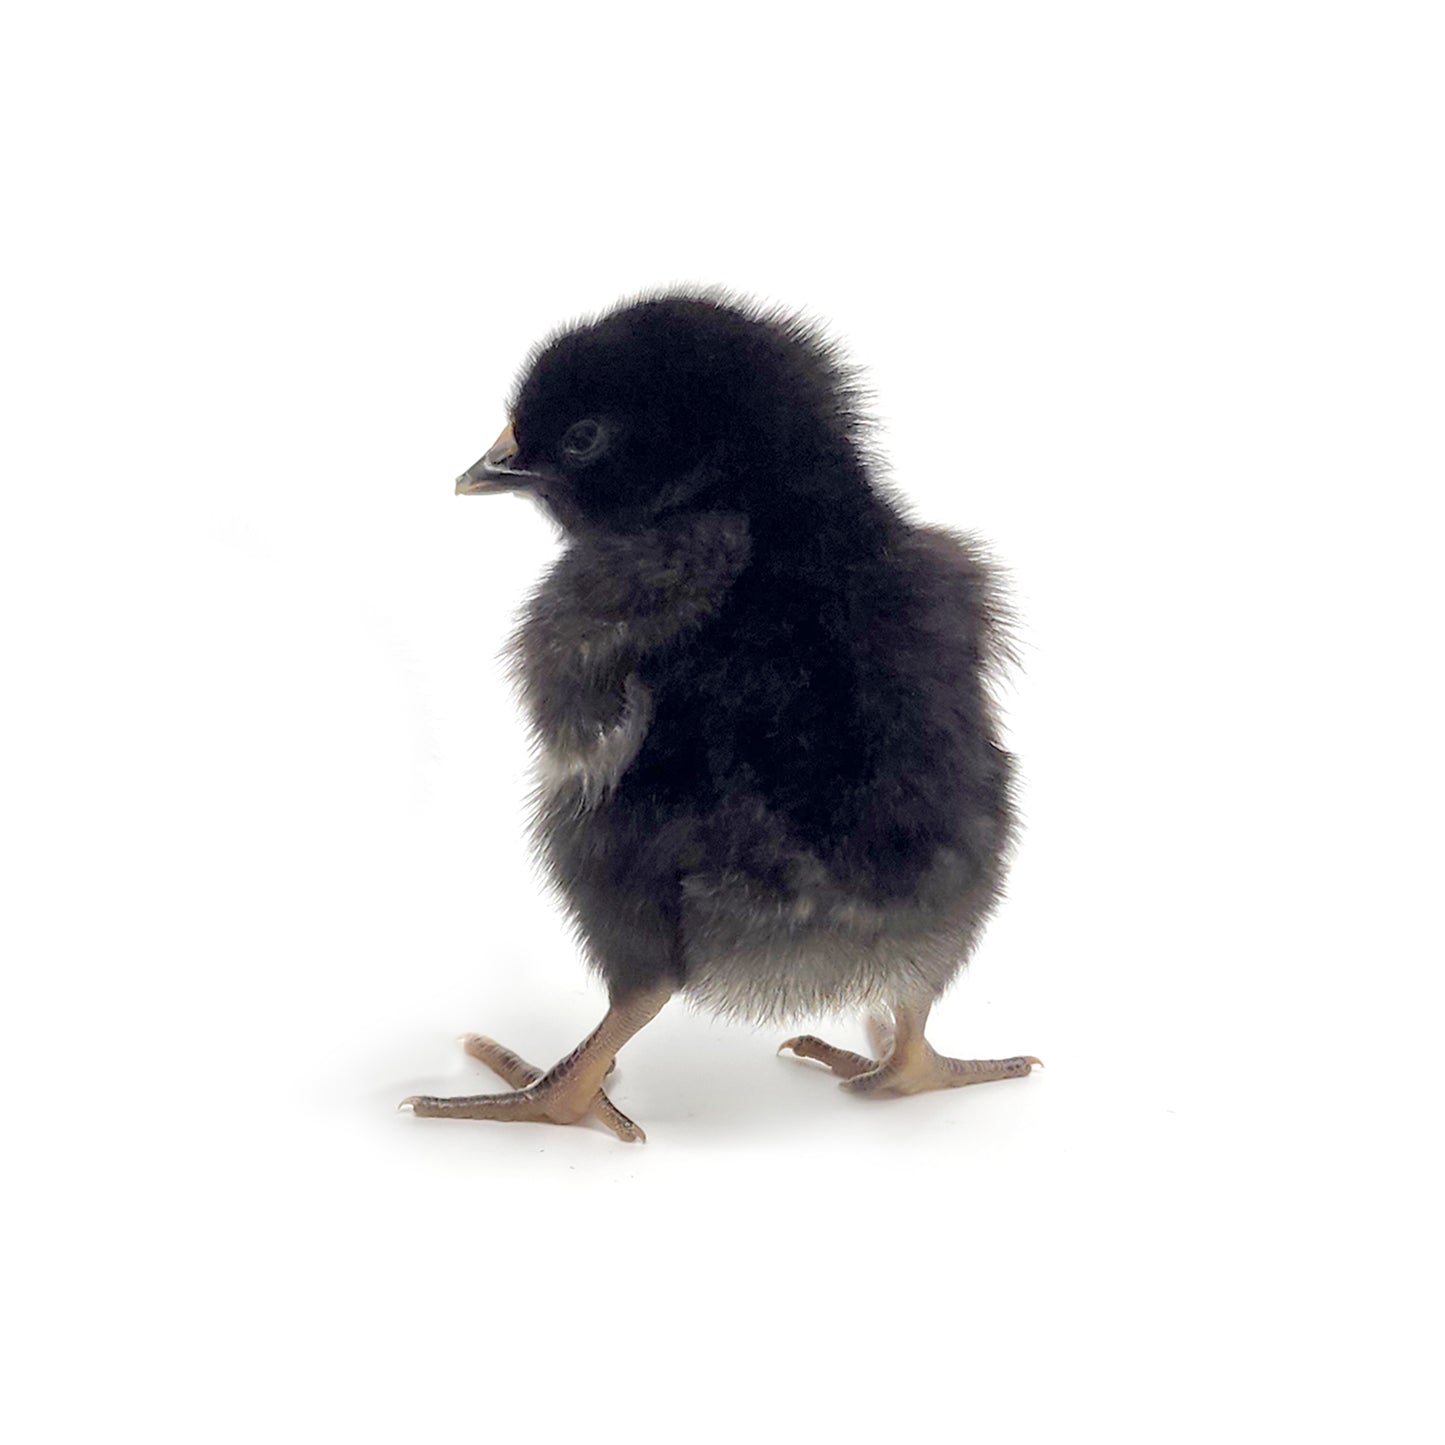 The Ameribella chicken breed will have beautiful black feathers with a hint of red. 